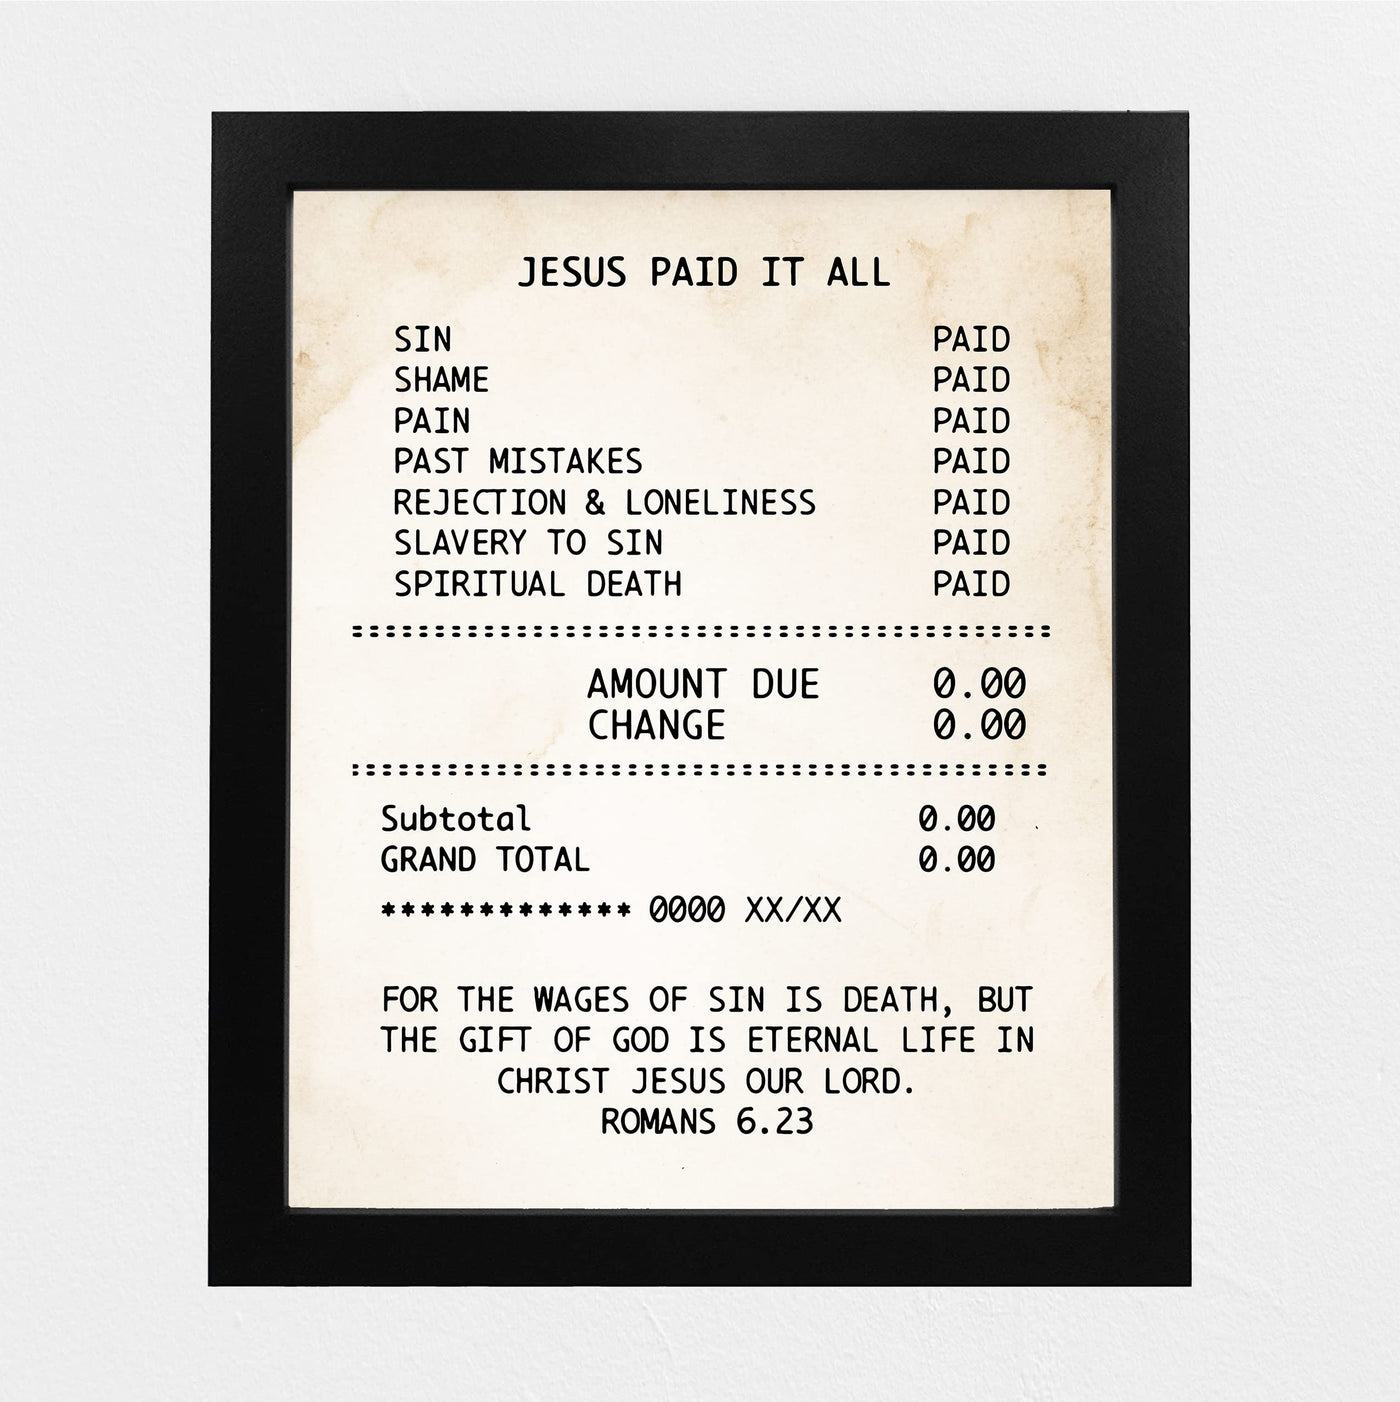 Jesus Paid It All Inspirational Christian Wall Decor-8 x 10" Replica Receipt Design Art Print -Ready to Frame. Motivational Decor for Home-Office-Church-School. Great Religious Gift of Faith!